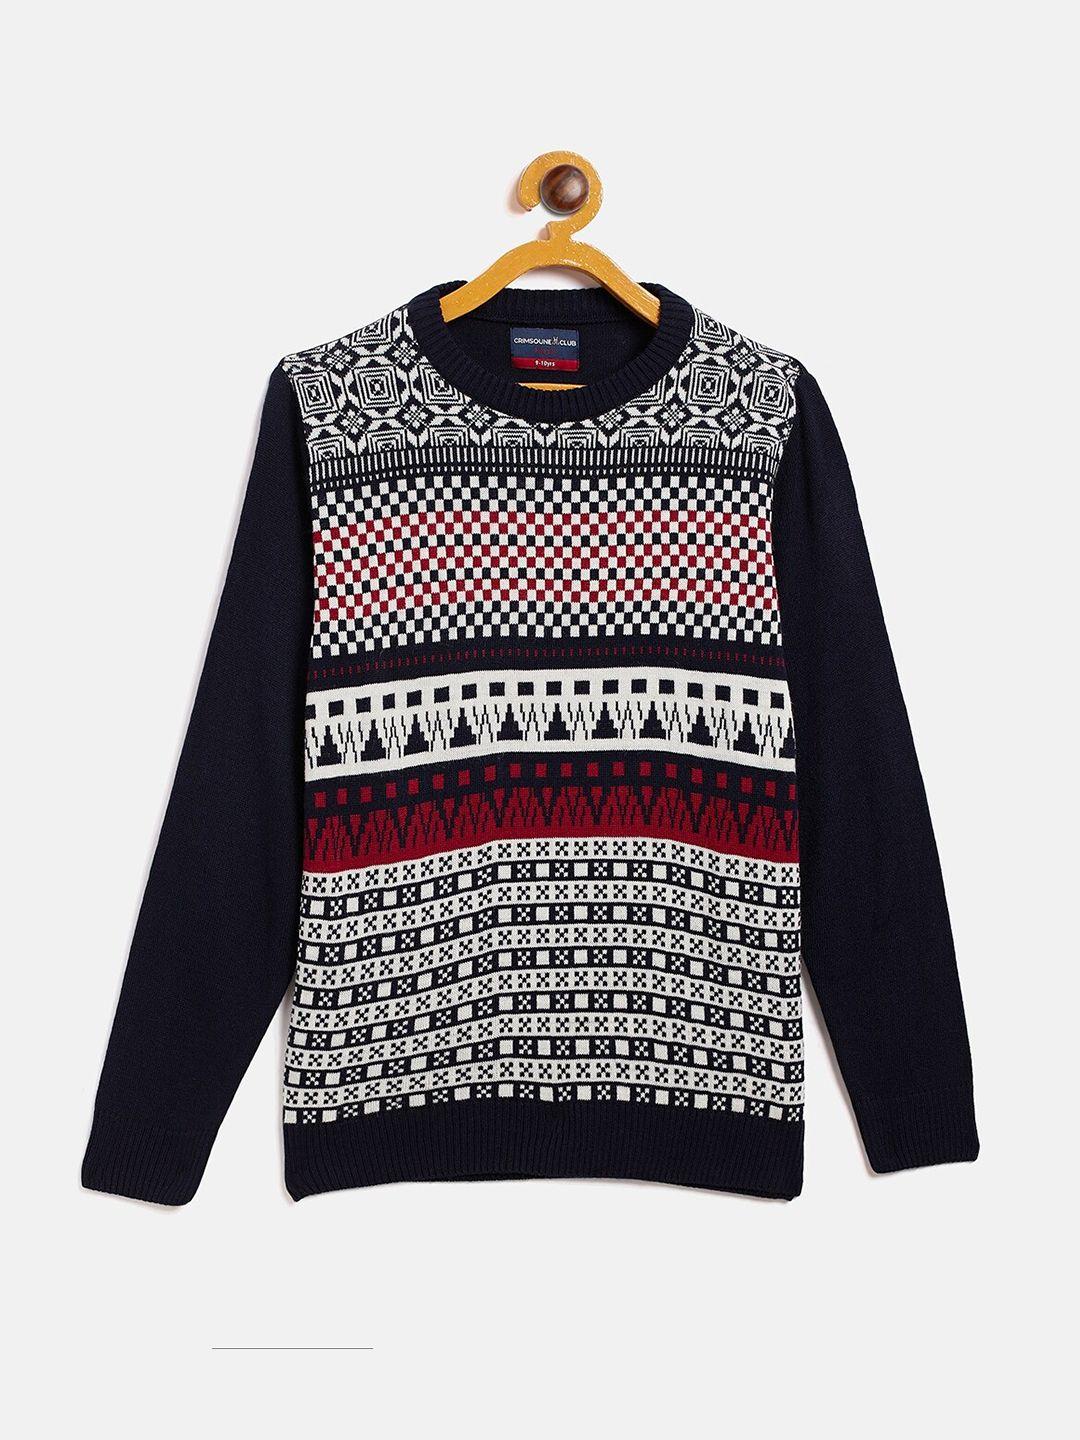 crimsoune club boys navy blue & red printed pullover